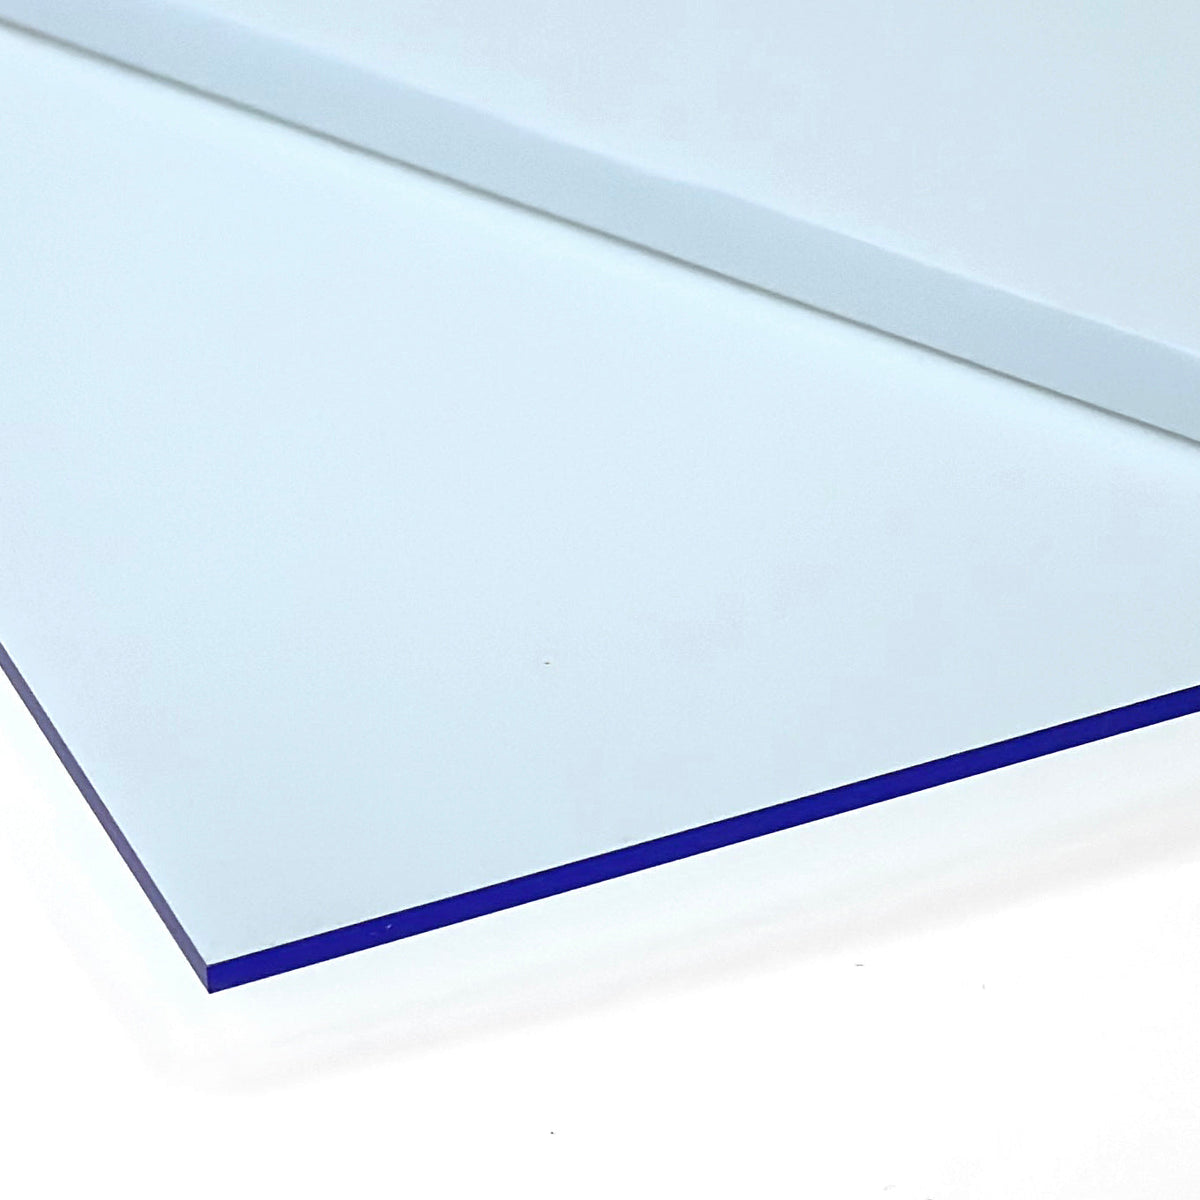 Transparent Blue Acrylic with laser cutting & printing - 600x400mm